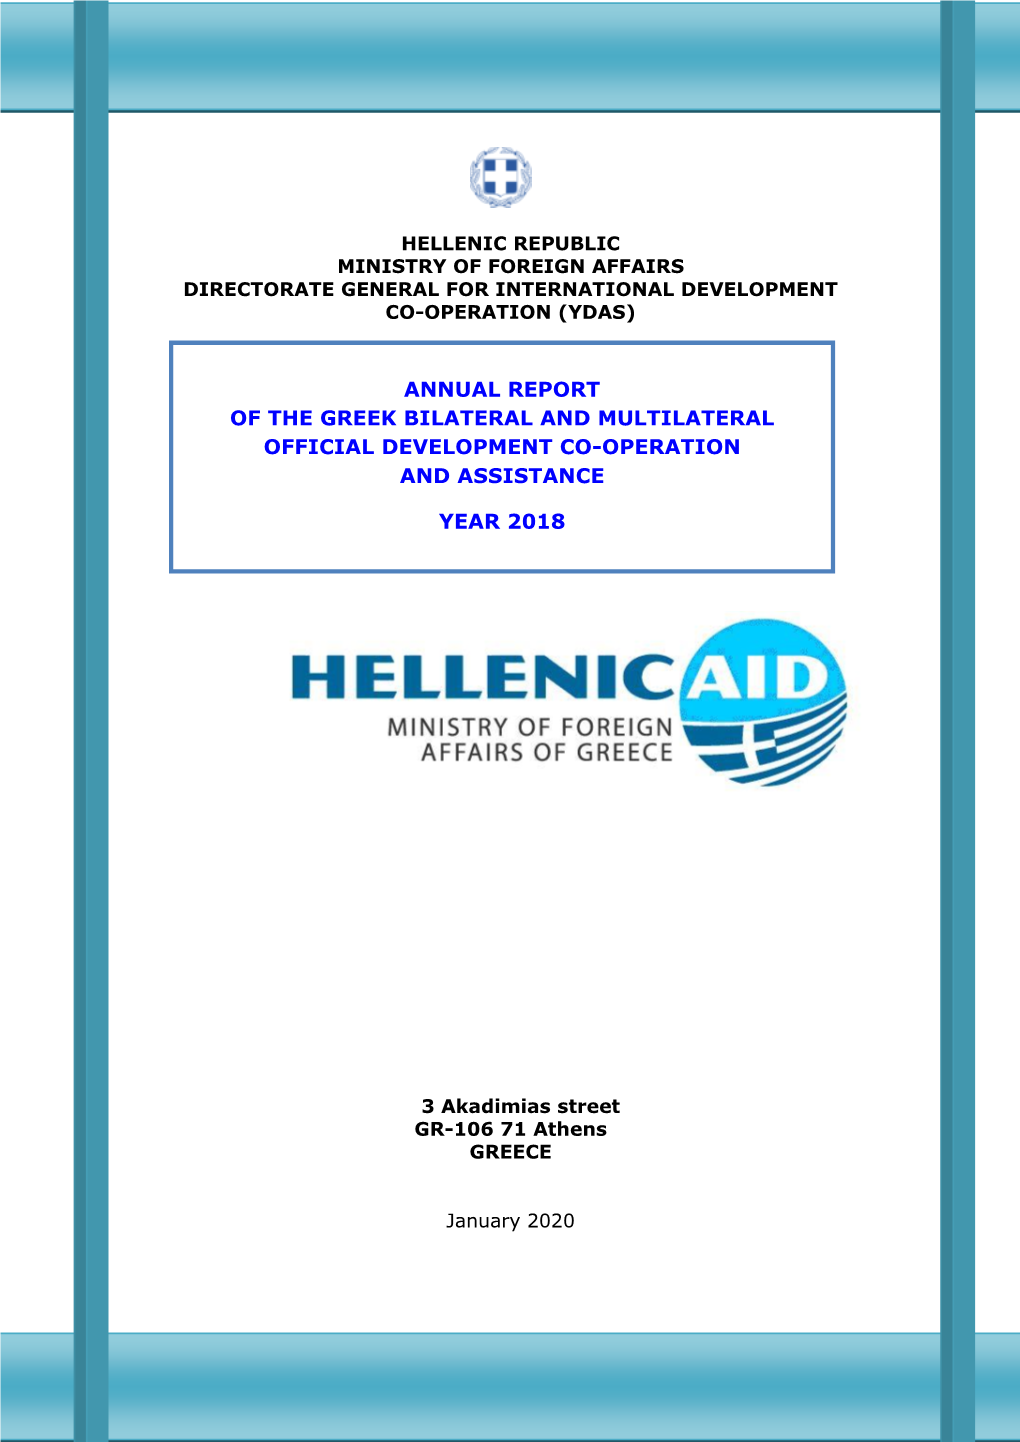 Annual Report of the Greek Bilateral and Multilateral Official Development Co-Operation